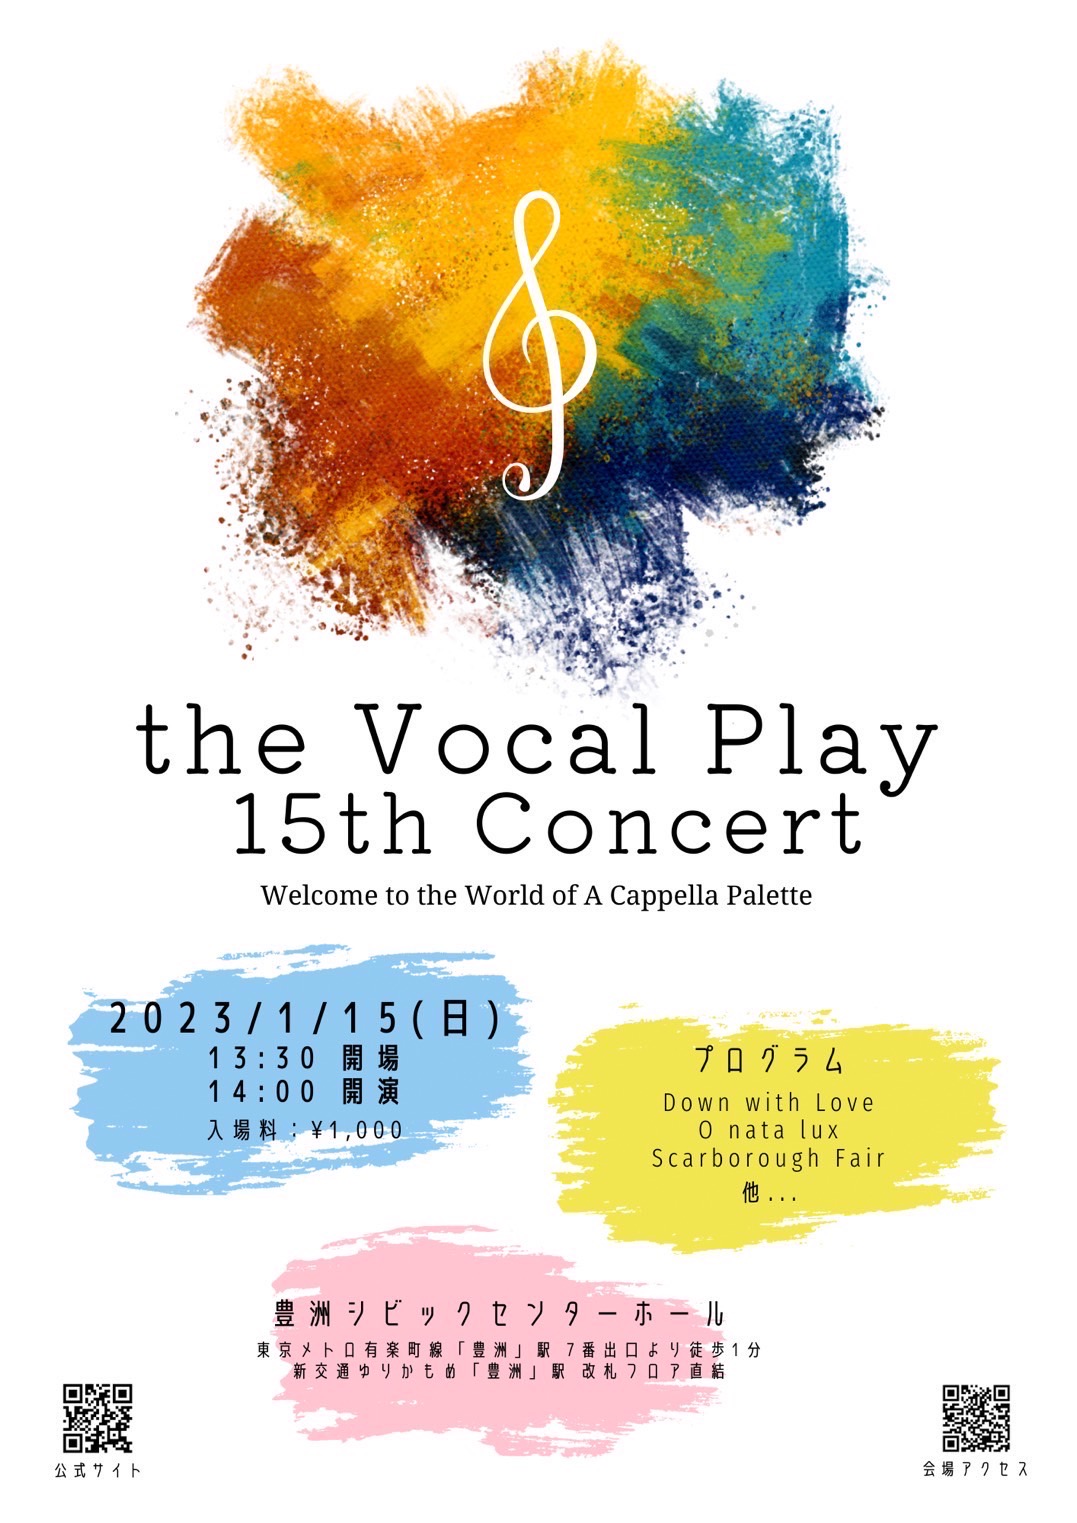 the Vocal Play 15th Concert